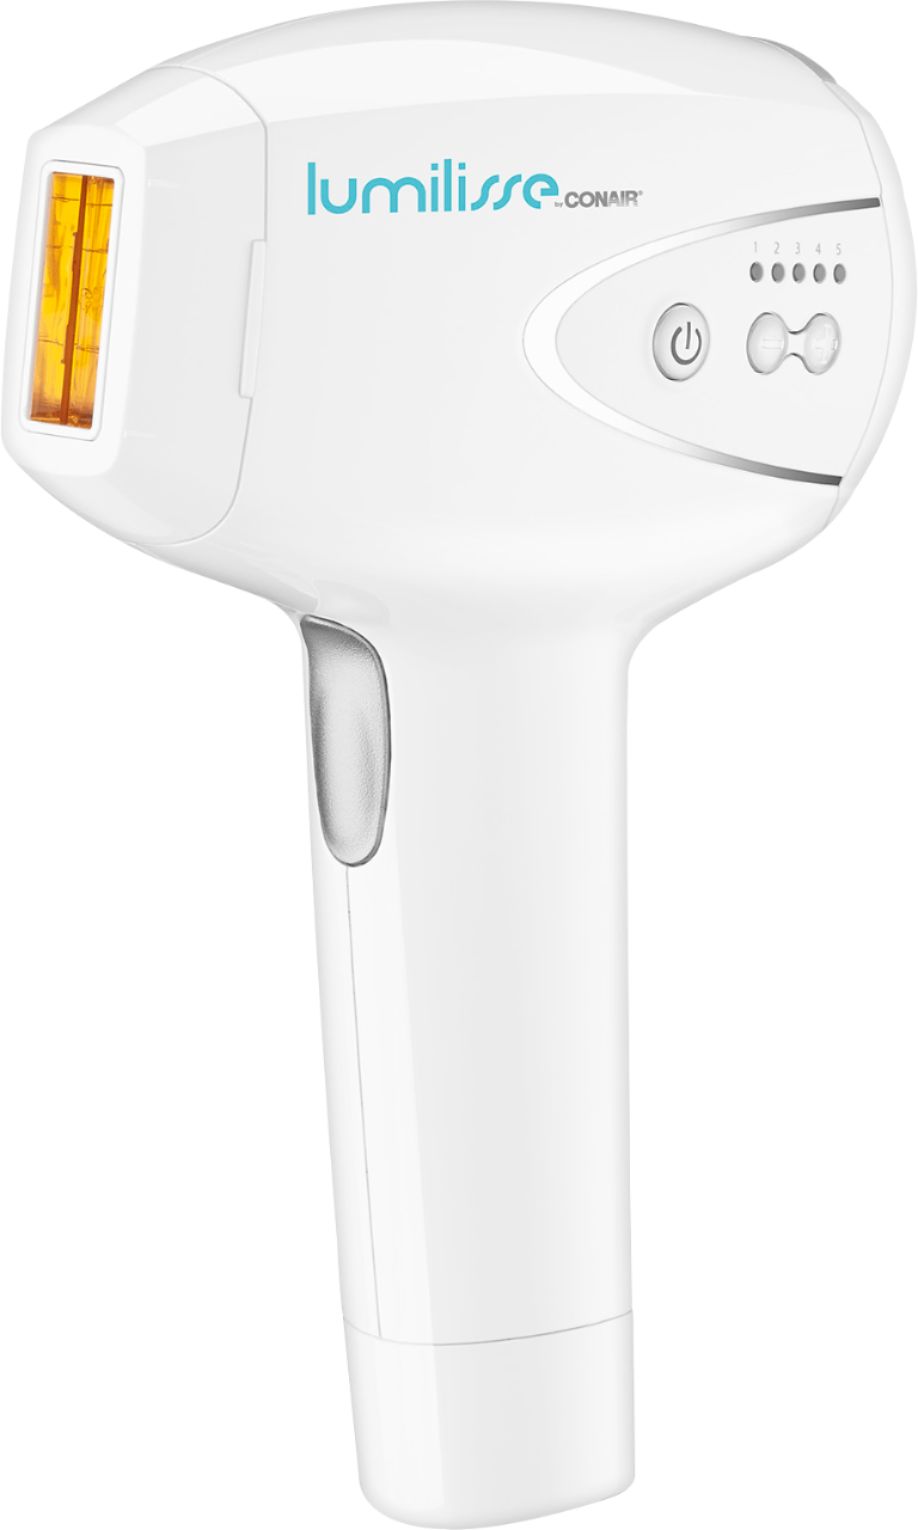 Angle View: Conair - ExtremeSteam Handheld Fabric Steamer - White